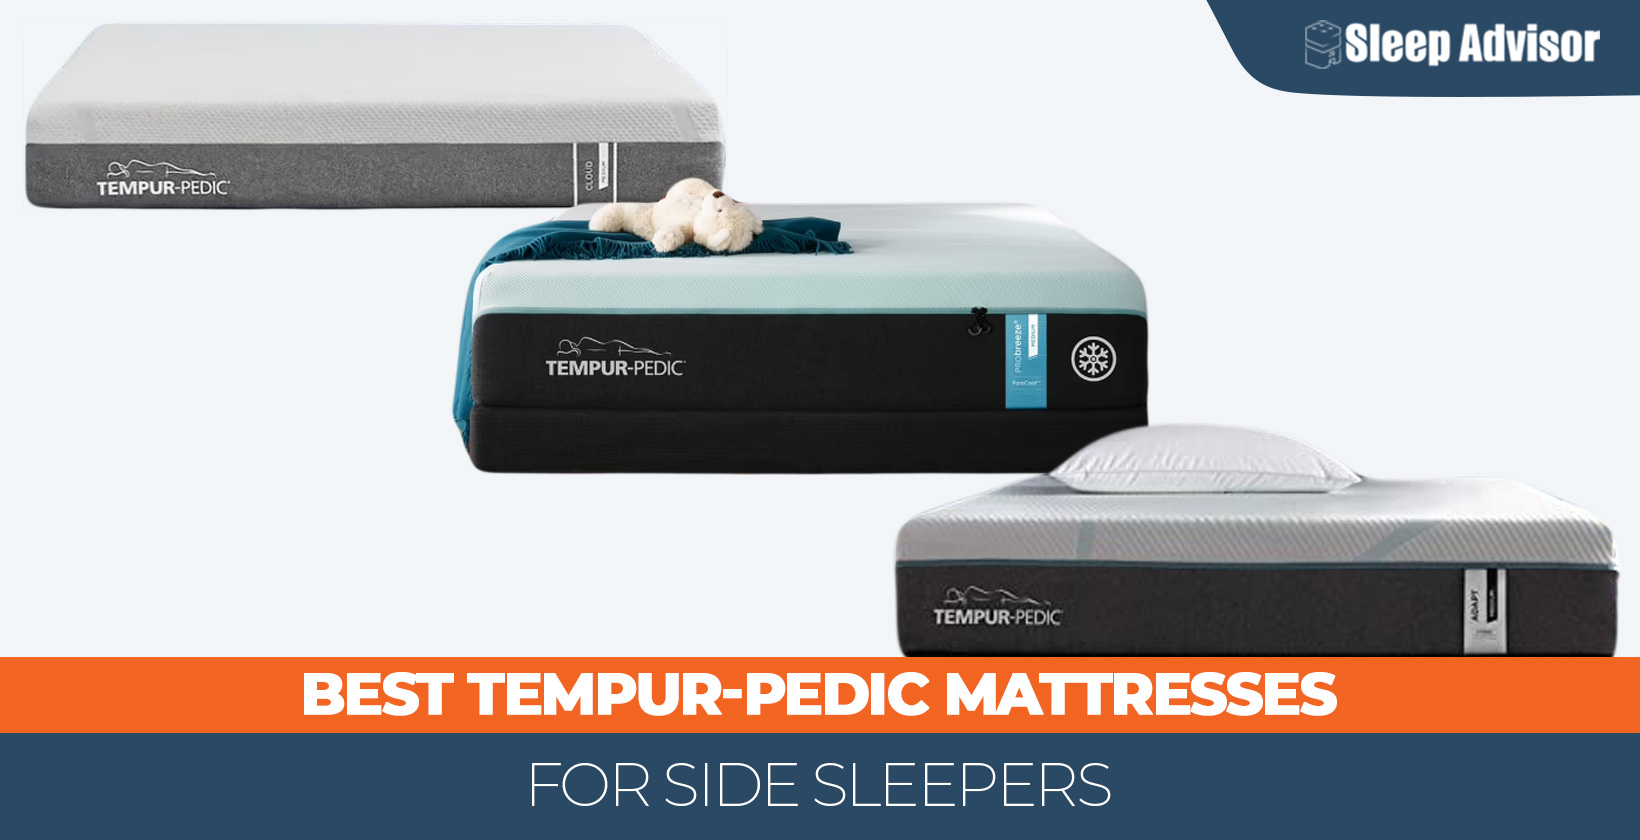 The Best Tempur-Pedic Mattresses for Side Sleepers Review 1640x840px